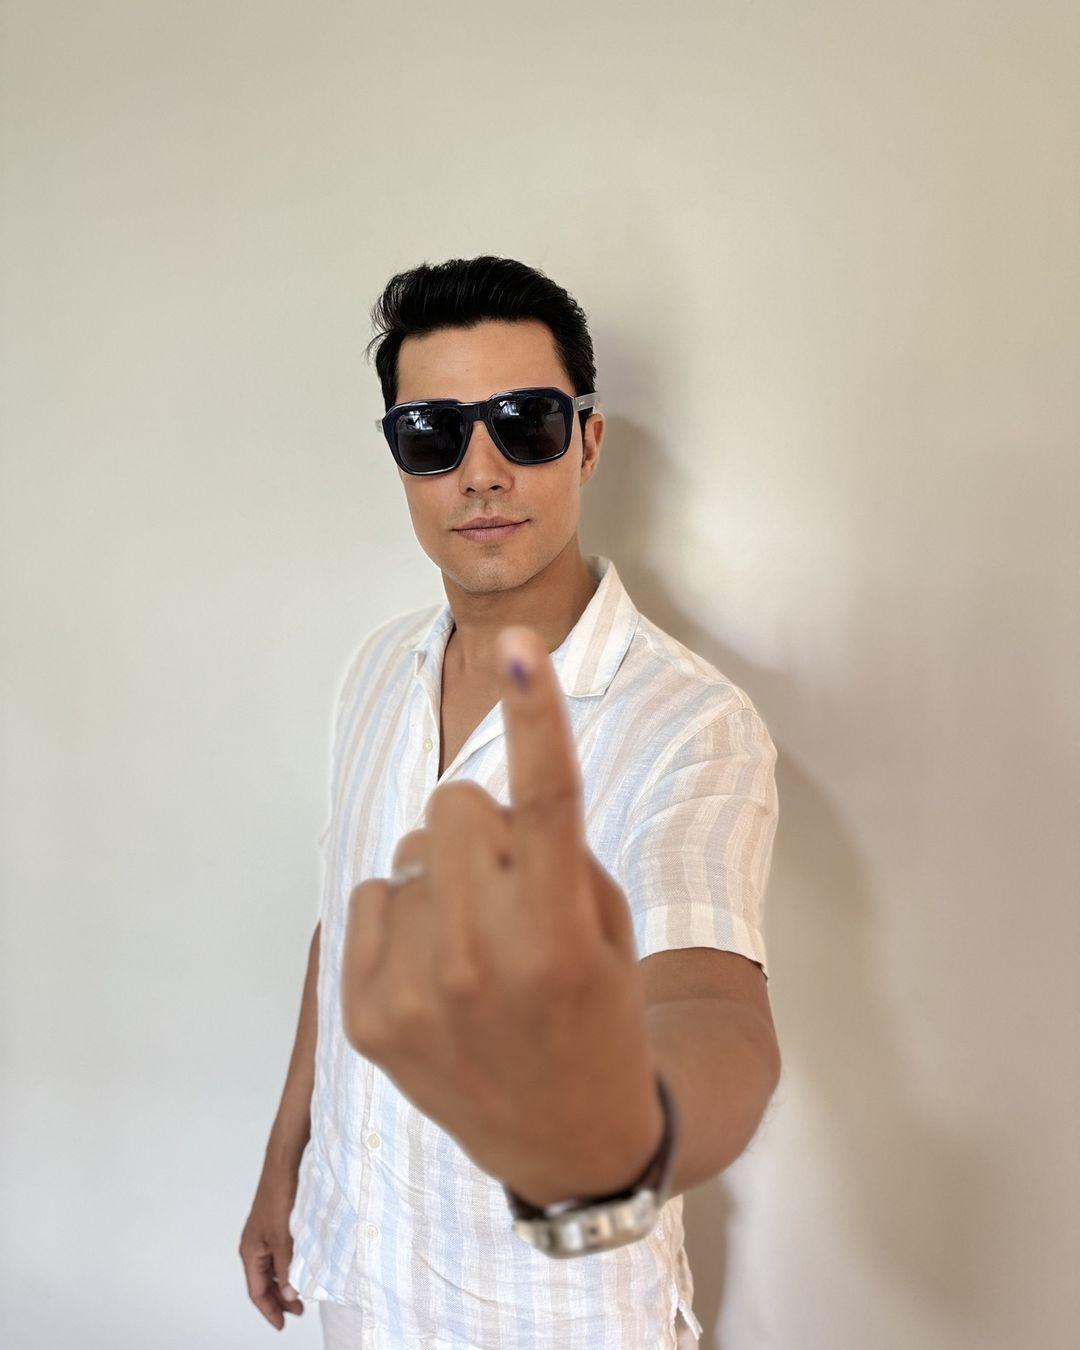 Randeep Hooda took to Instagram and posted a picture in a white shirt. The actor was seen flaunting his inked finger as he cast his vote